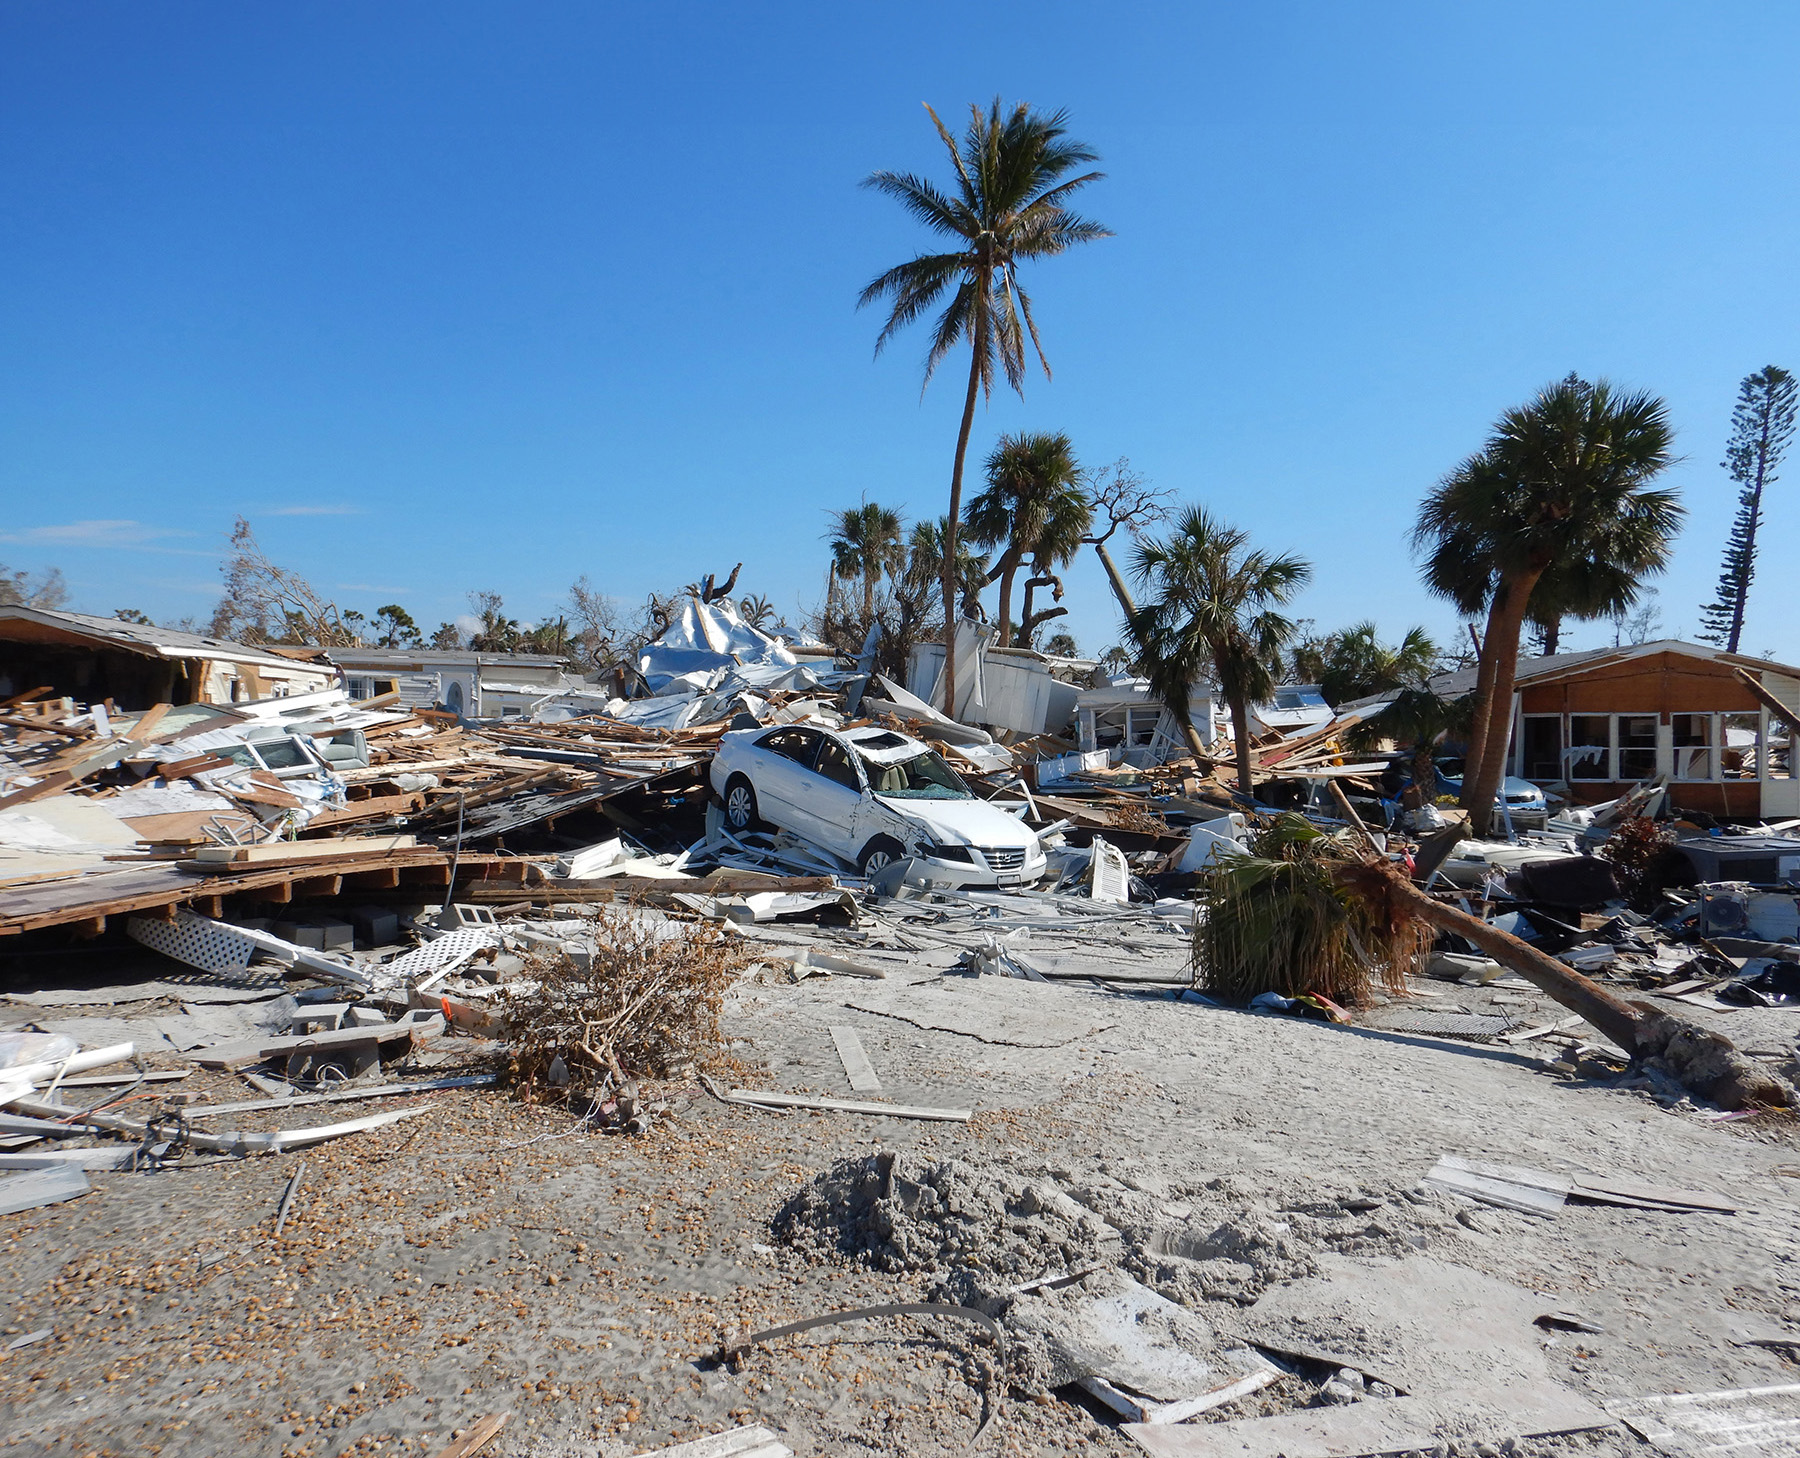 Houses have collapsed into piles of rubble and a damaged white car sits atop one of the piles. Fallen palm trees and other debris are scattered around. 